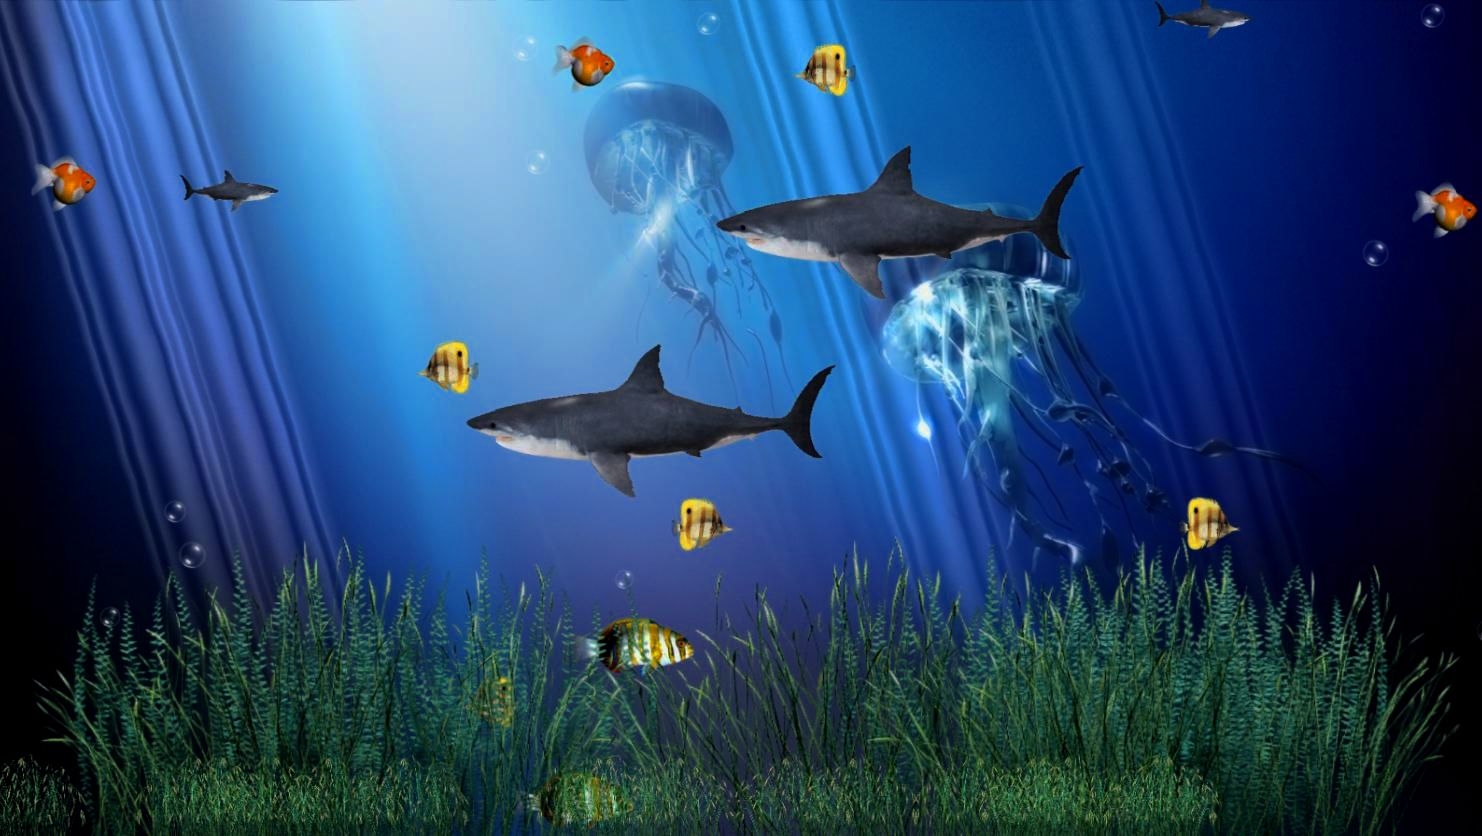 Free Live Animated Wallpapers For Pc - Moving Fish Wallpaper Windows 7 , HD Wallpaper & Backgrounds